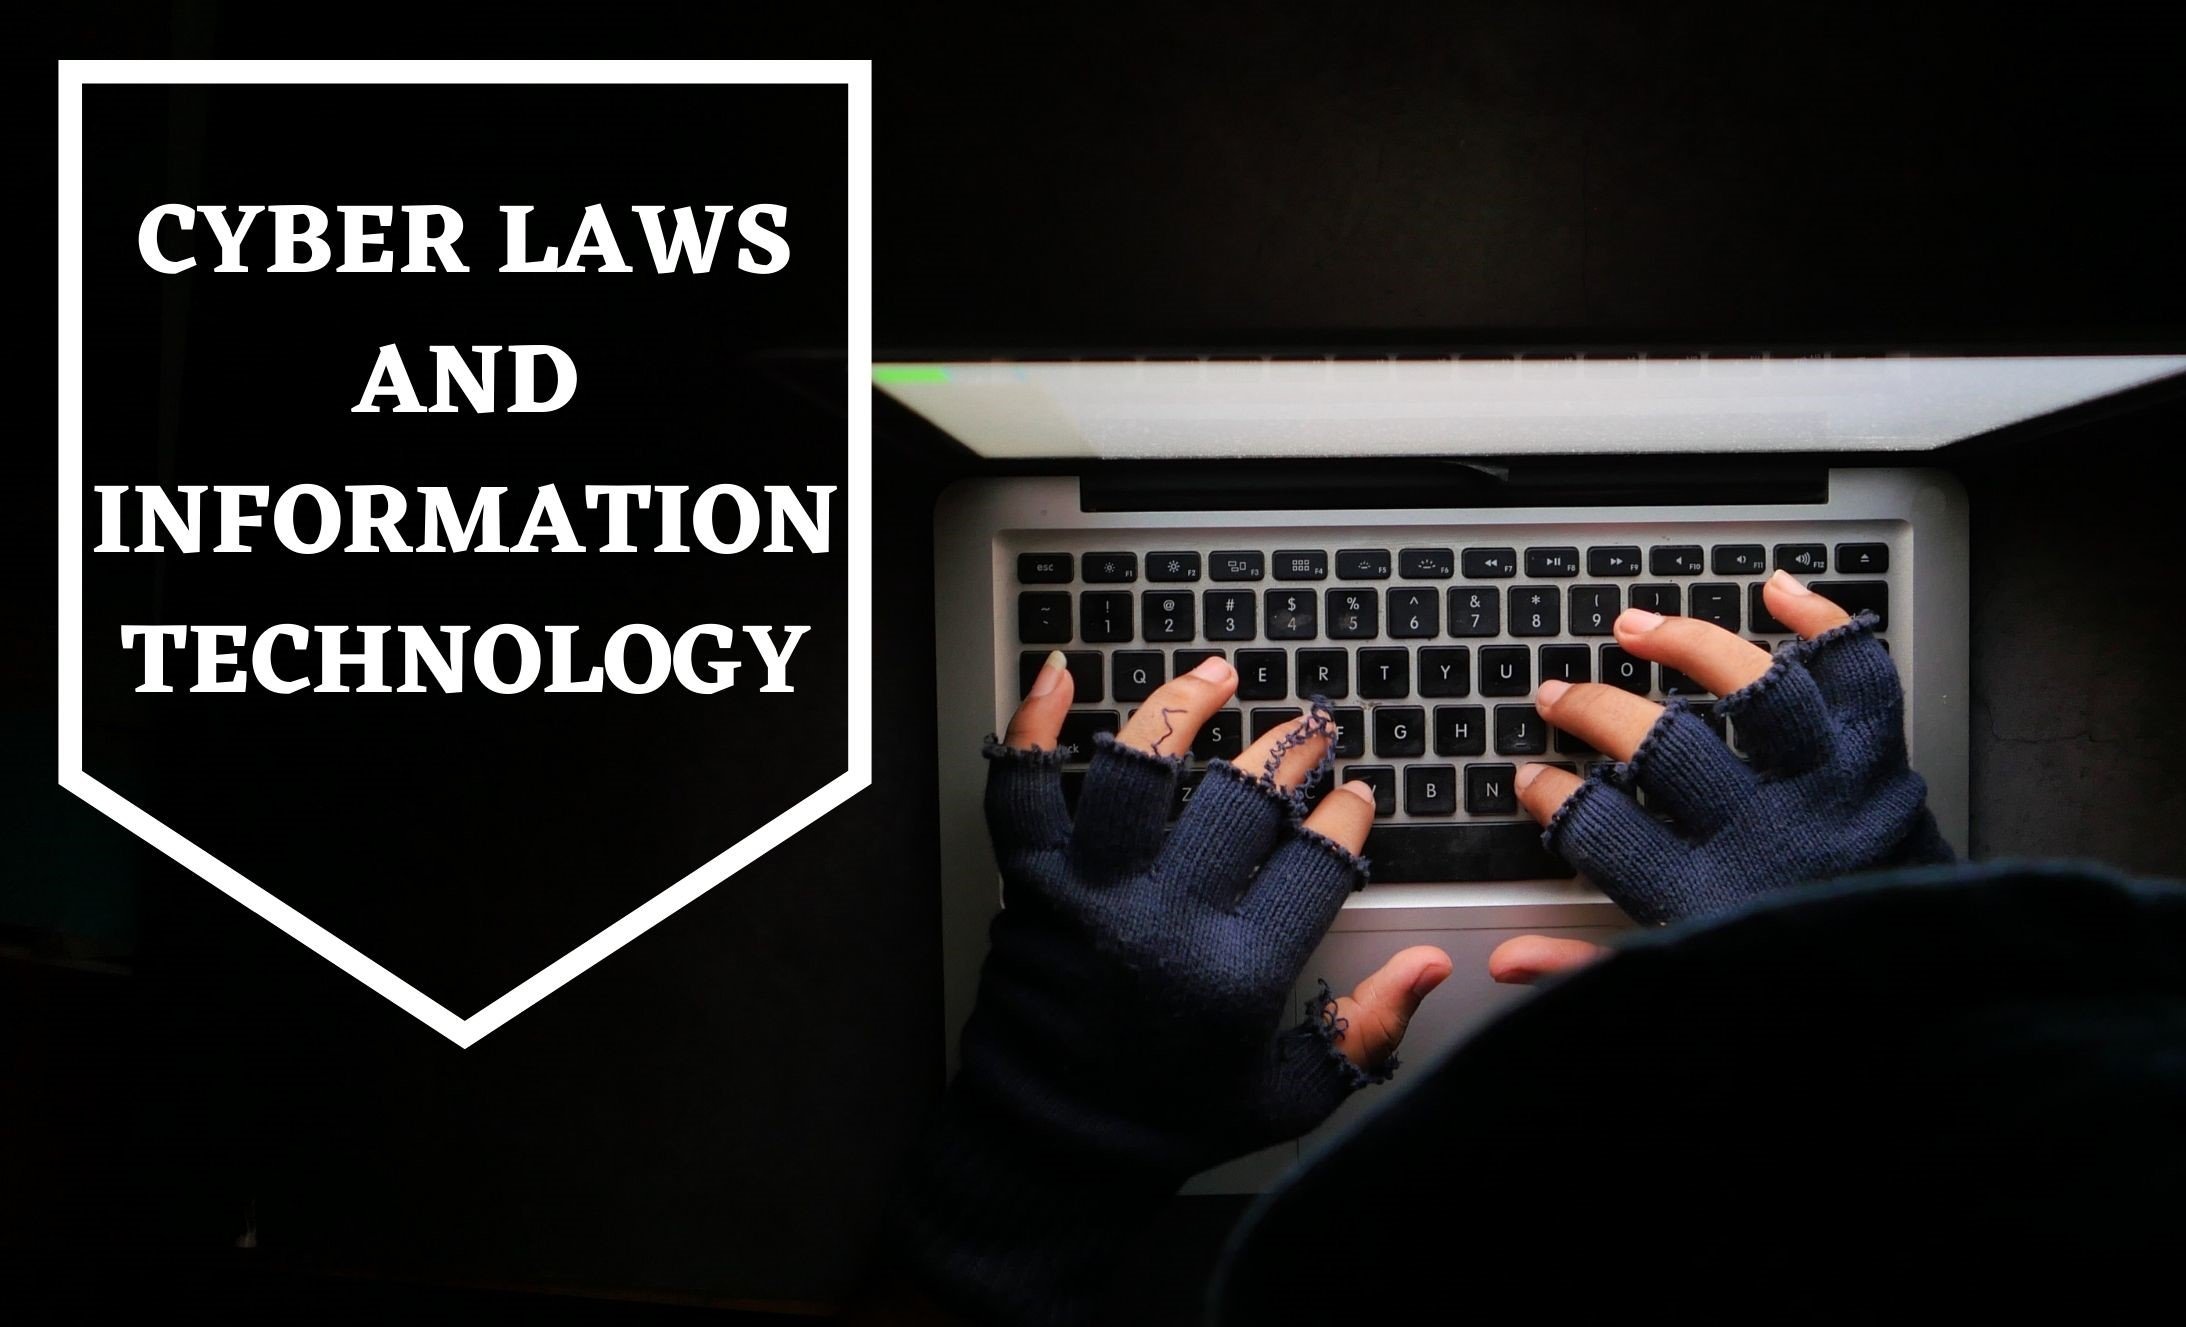 CYBER LAWS AND INFORMATION TECHNOLOGY